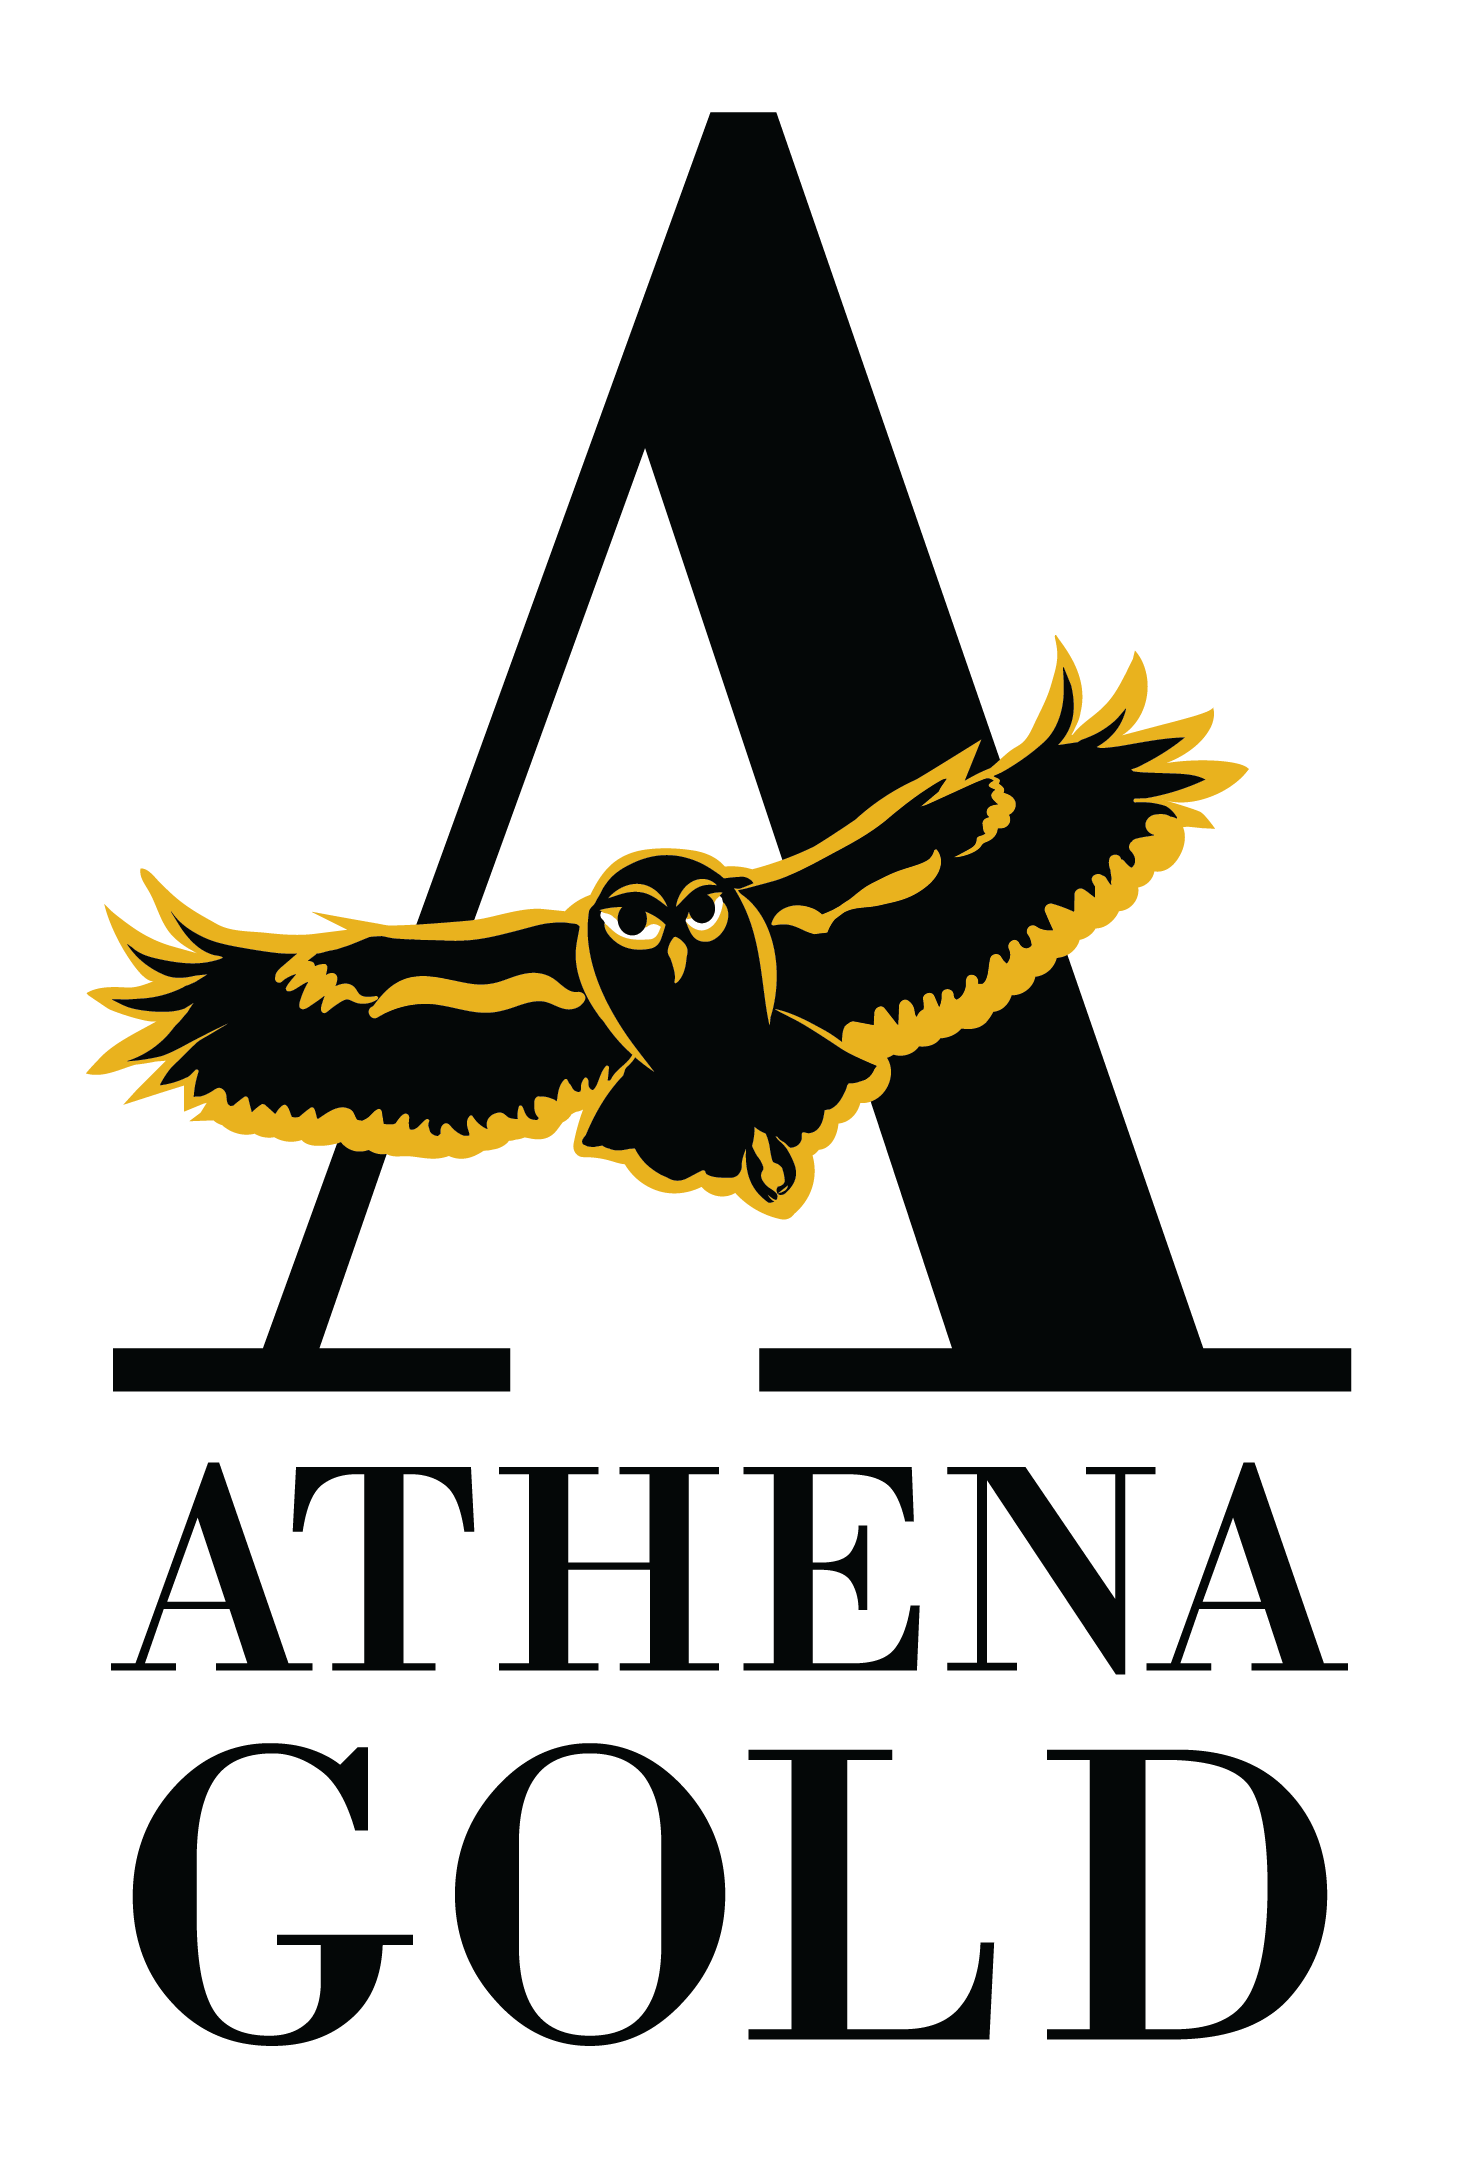 Athena Gold Corporation, Tuesday, November 23, 2021, Press release picture